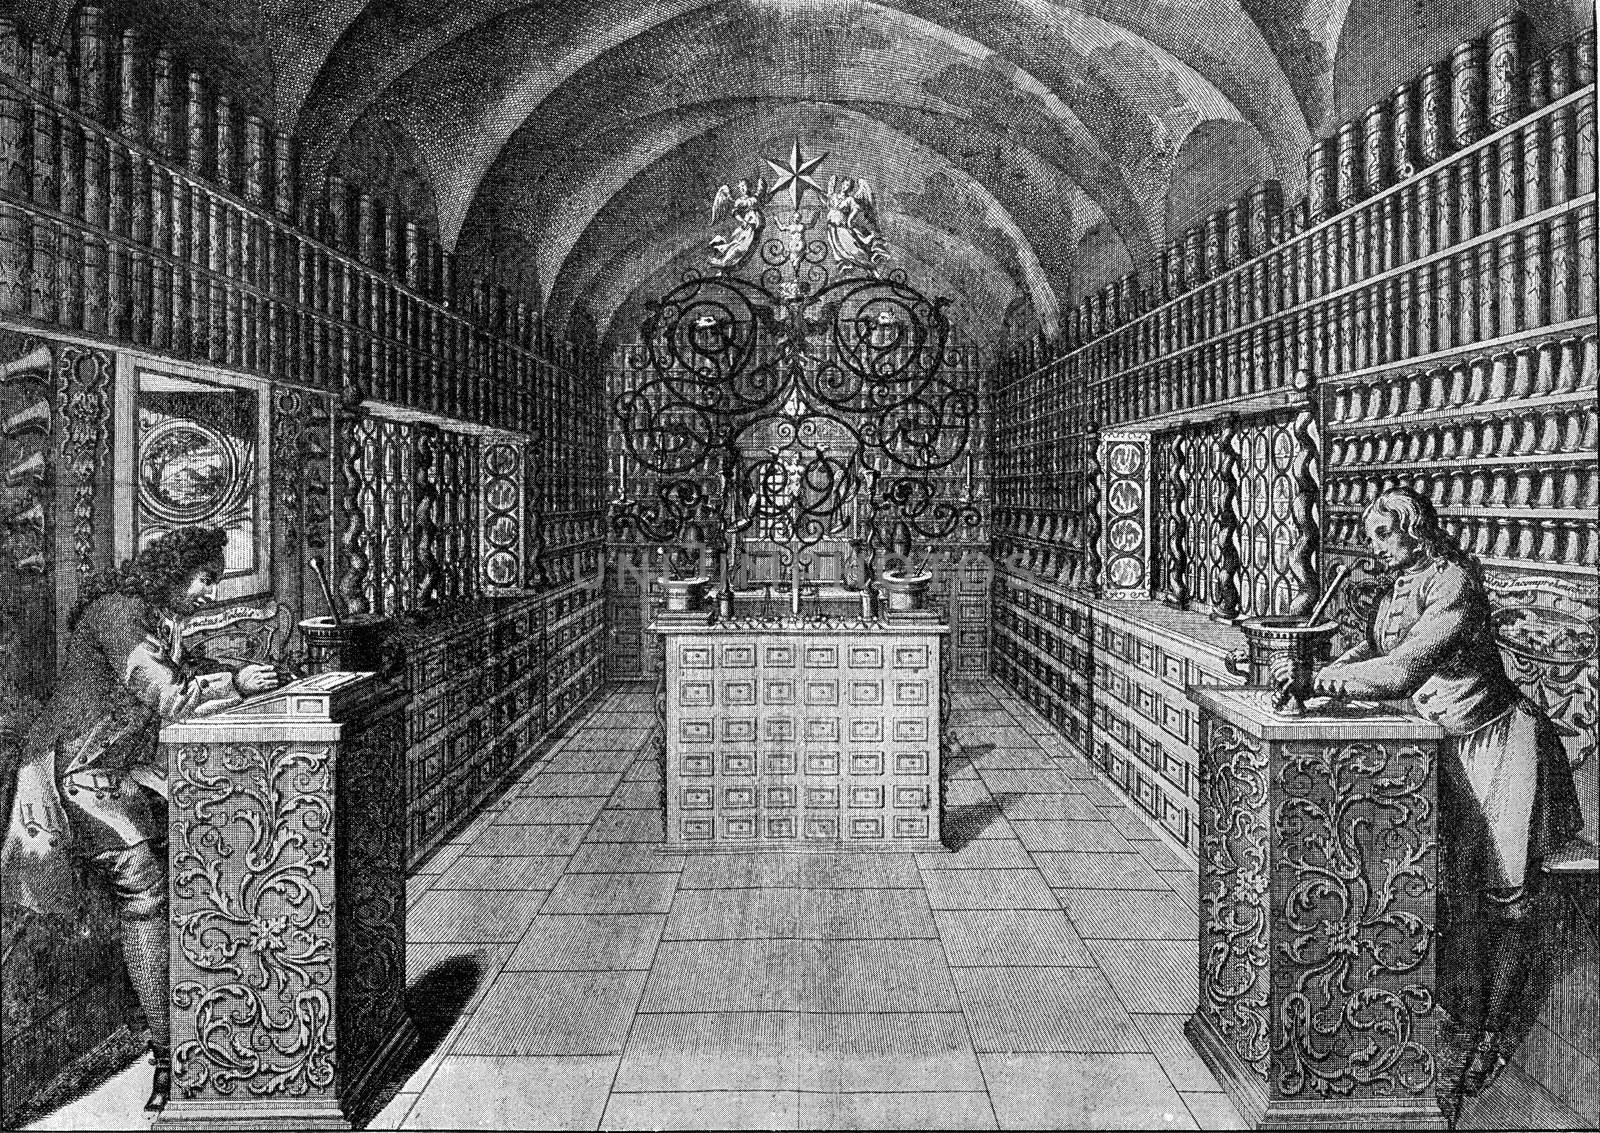 An old German pharmacy, vintage engraved illustration. From the Universe and Humanity, 1910.
